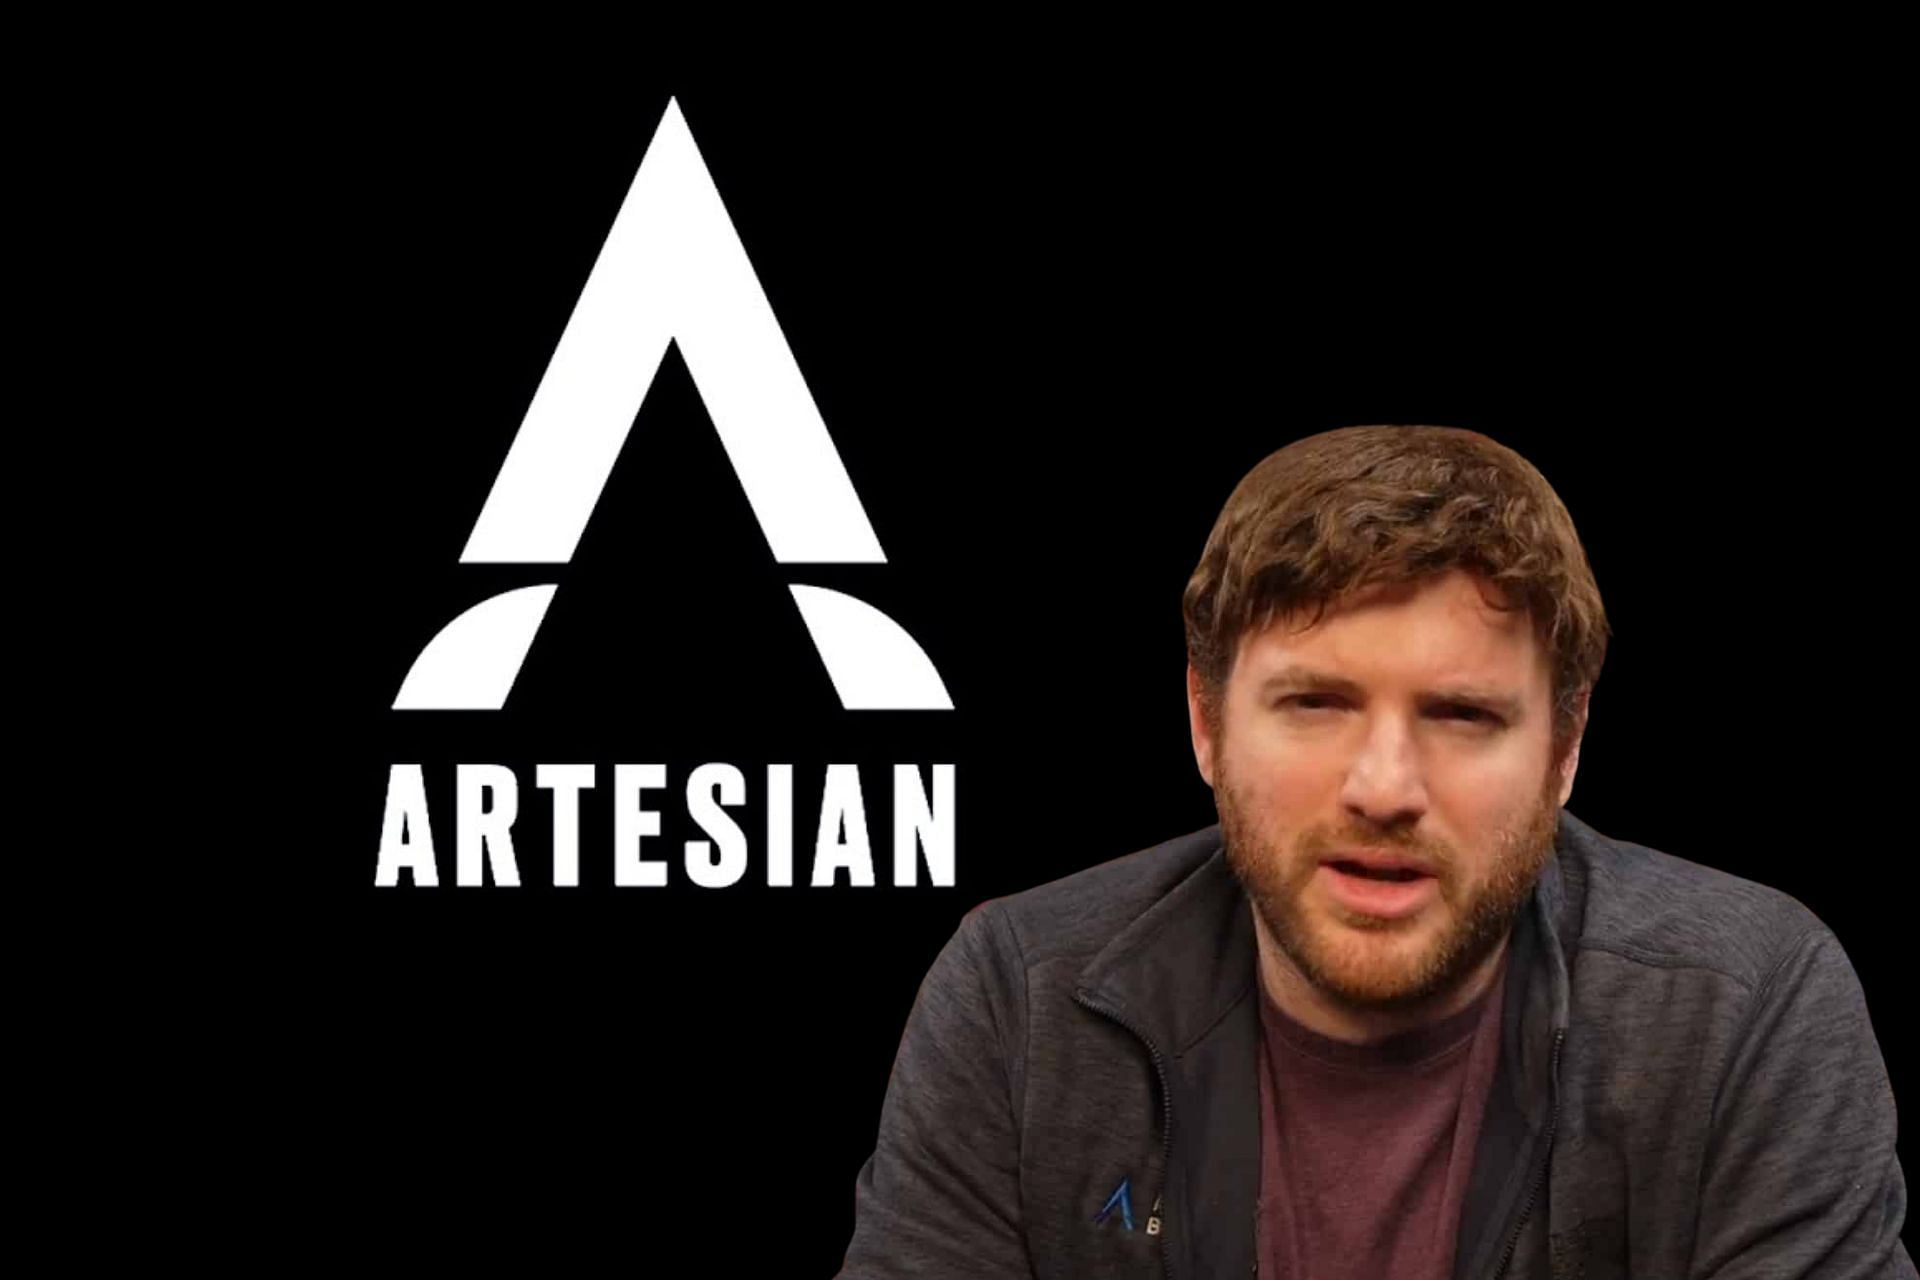 Artesian Builds has been on quite the rollercoaster ride since the fateful giveaway stream (Image via Sportskeeda)